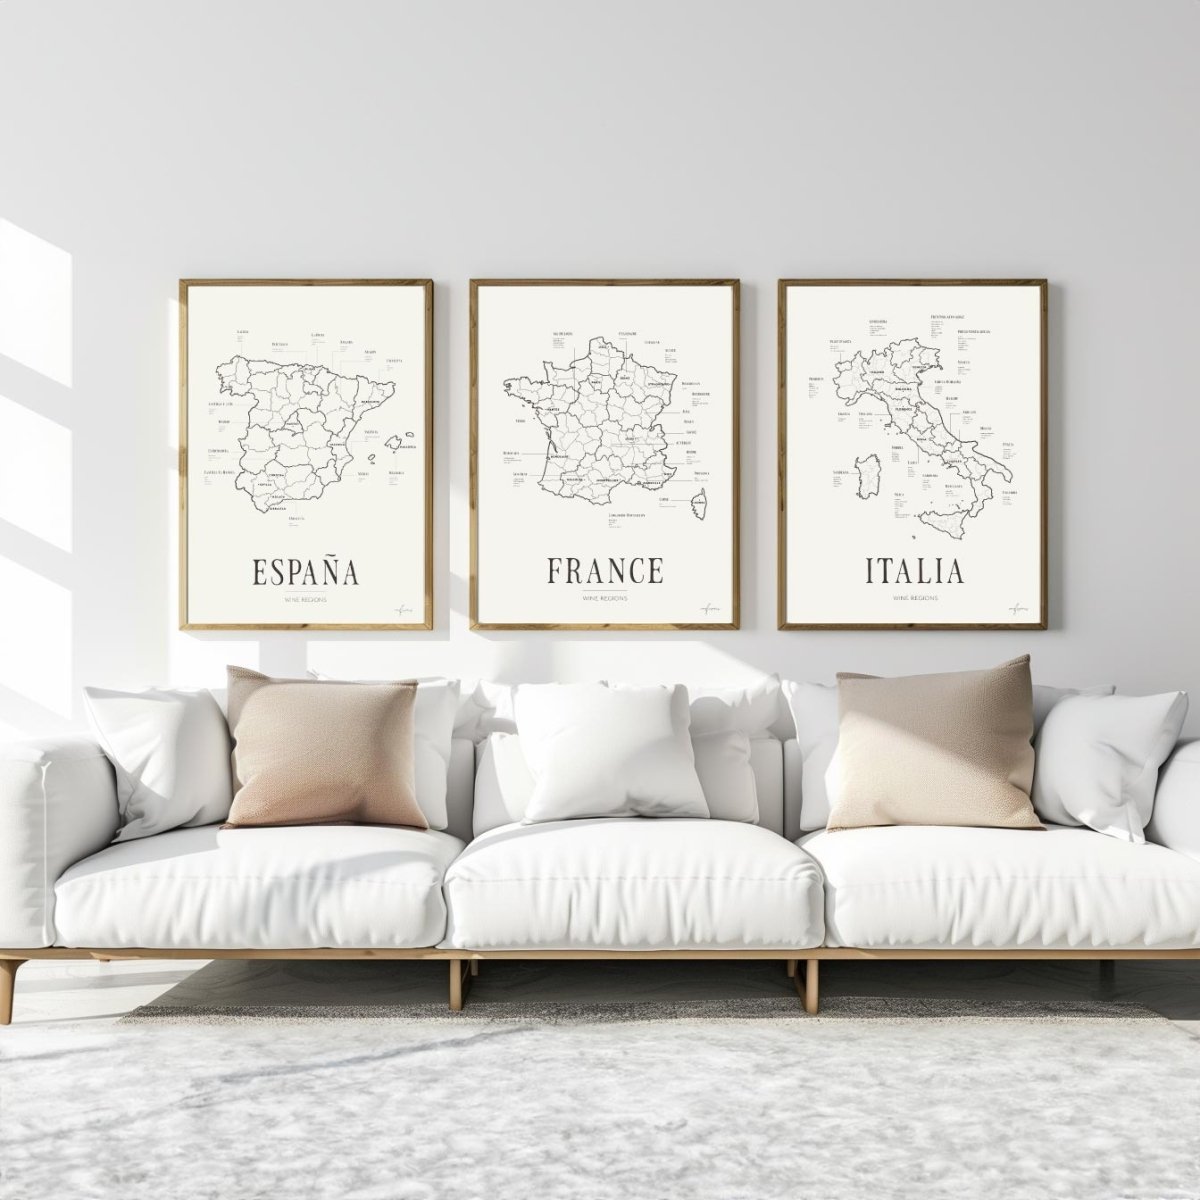 Tips for decorating your home with beautiful wine map posters - Corkframes.com